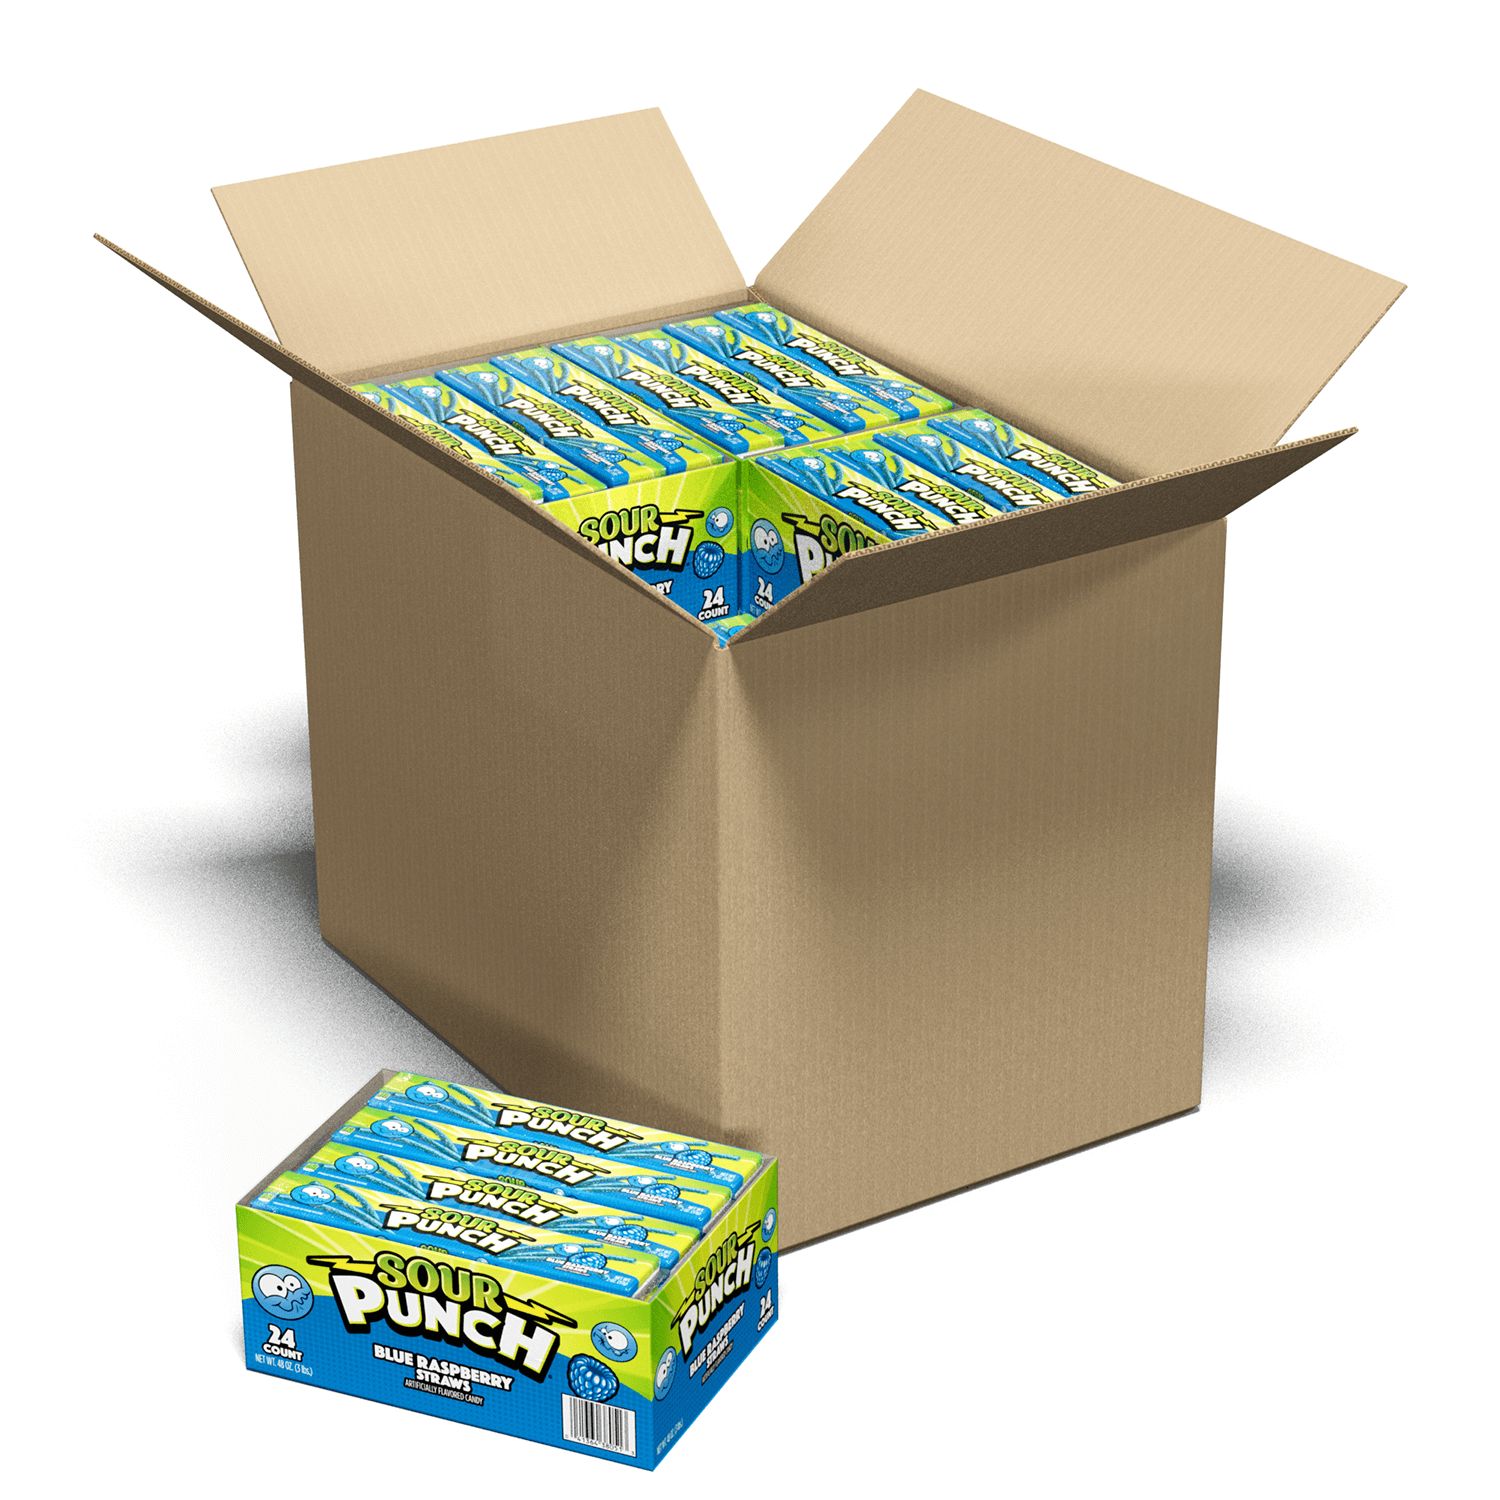 Sour Punch Blue Raspberry Straws 24 Pack 2oz Bags